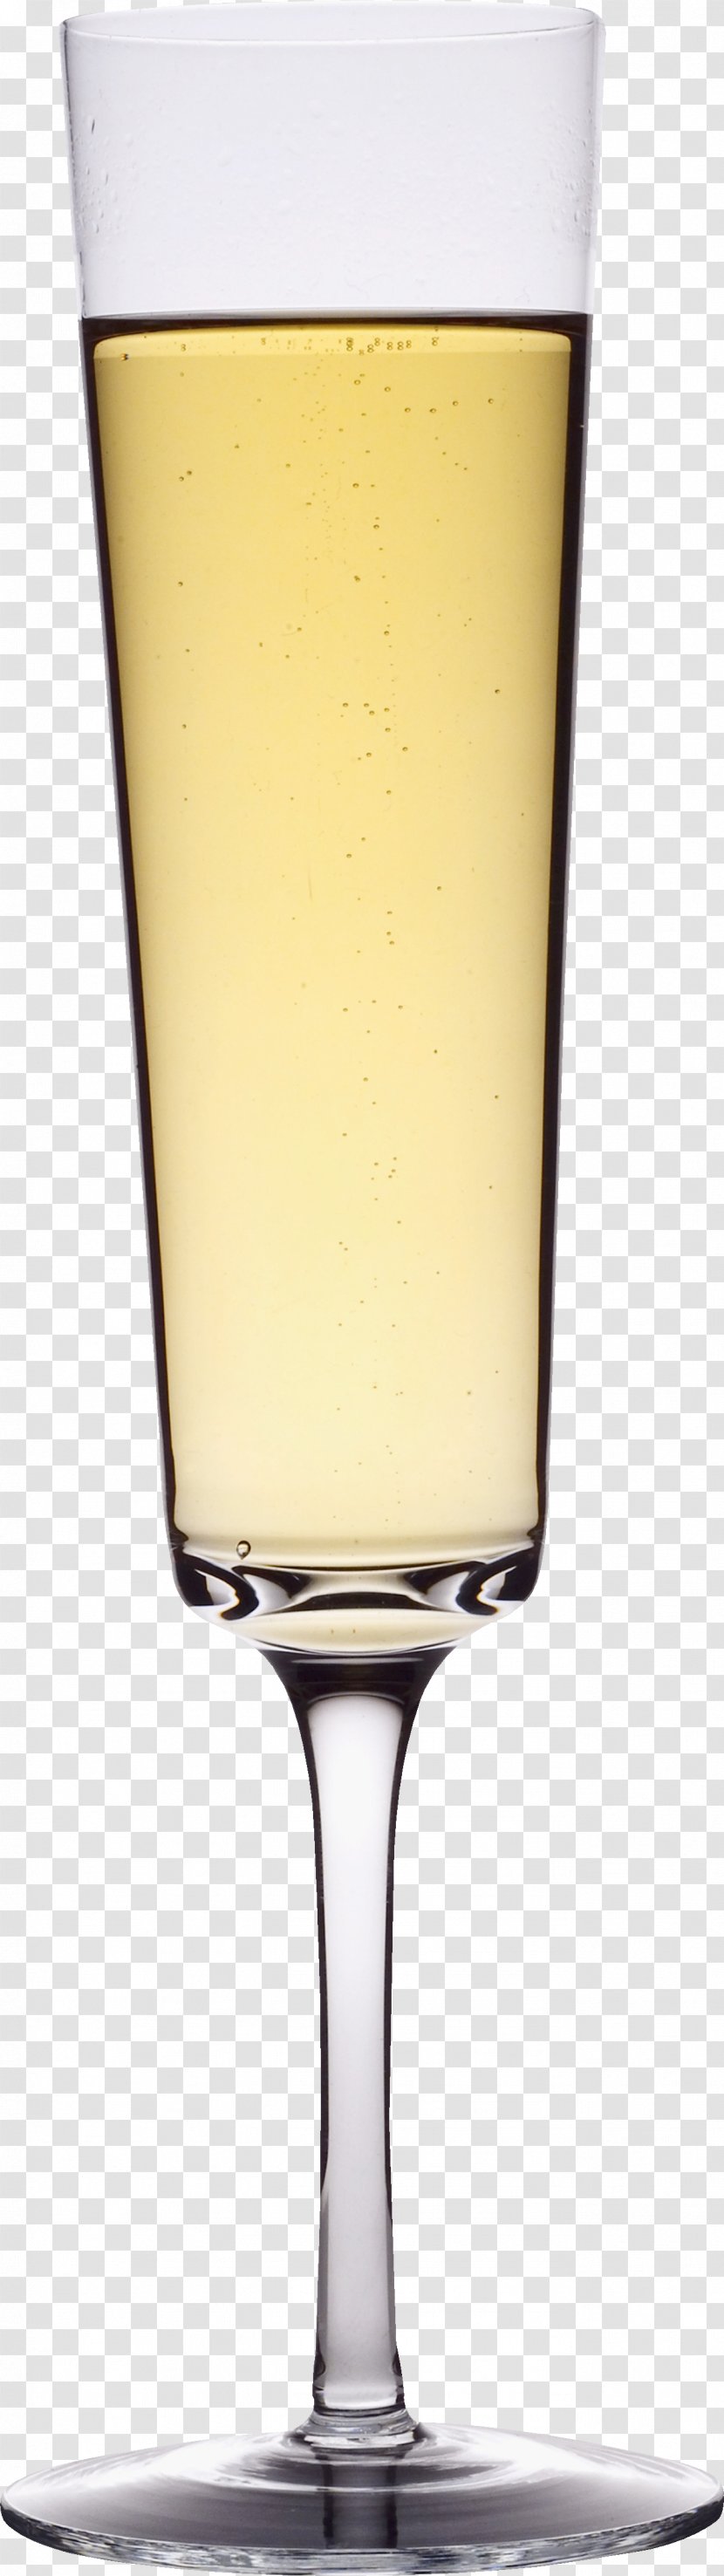 Champagne Cocktail Wine Glass - Image Transparent PNG